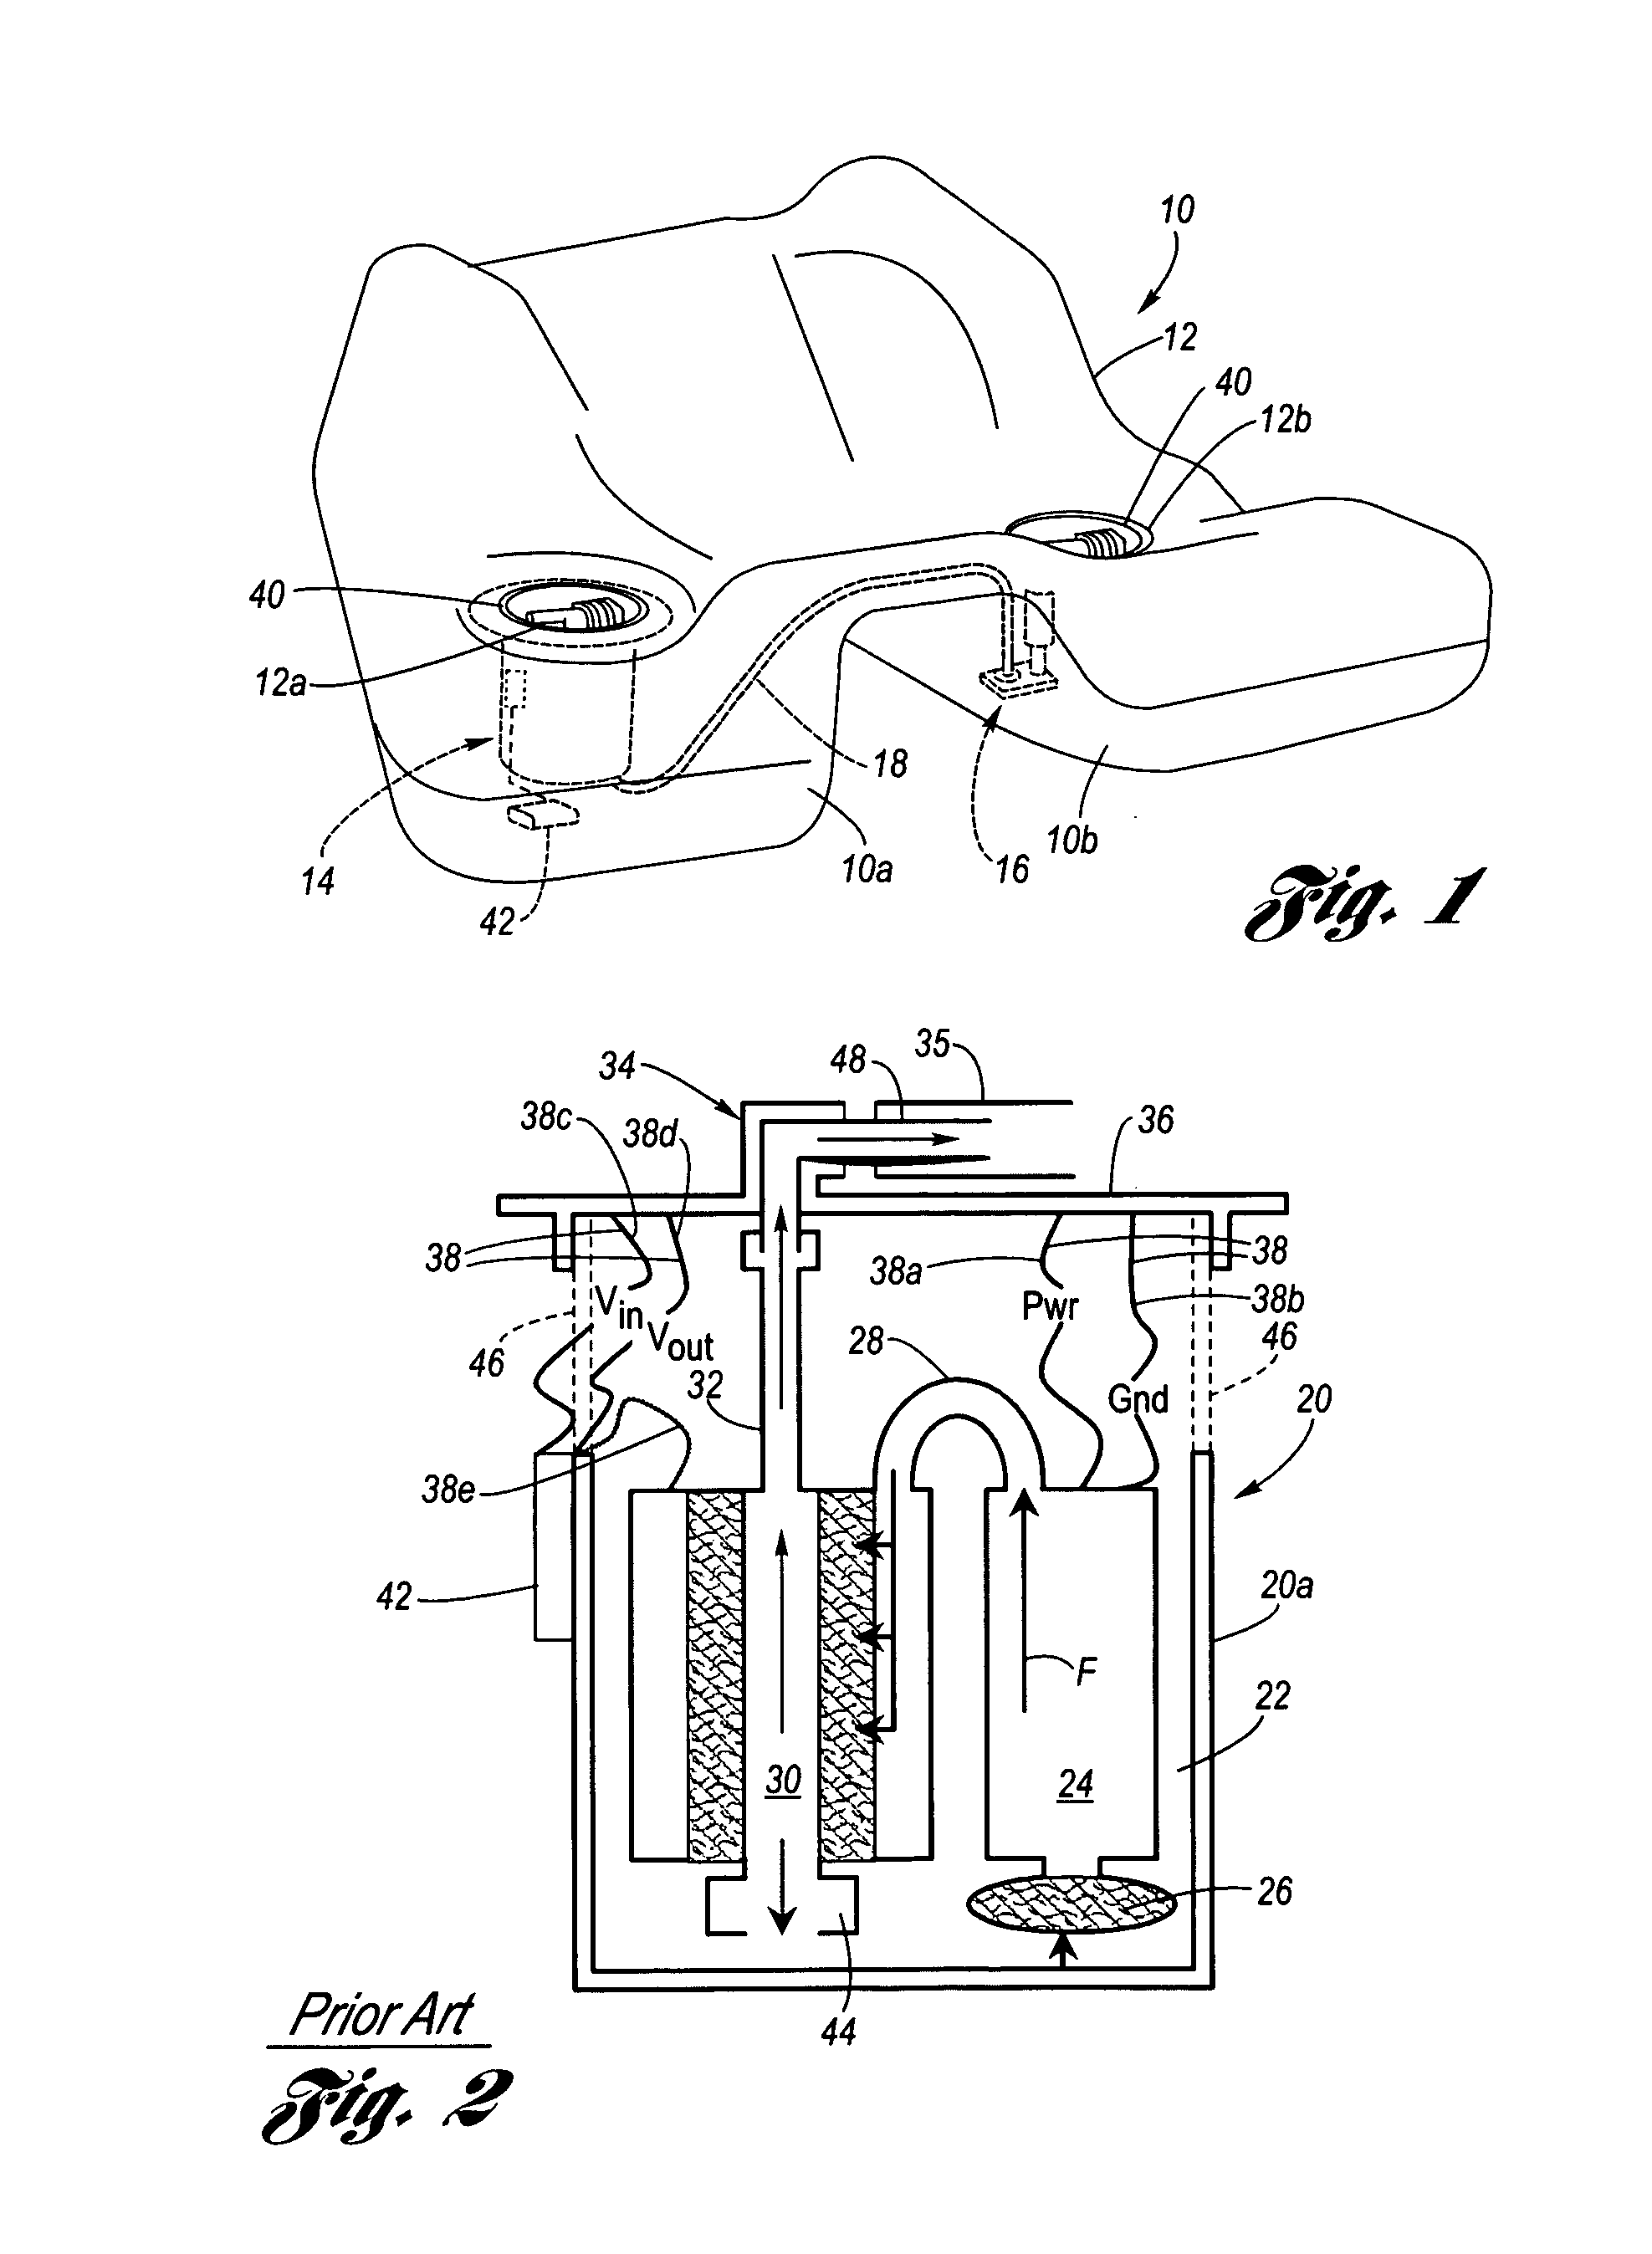 Fuel Port Elbow Having a Truncated Conductive Insert Tube